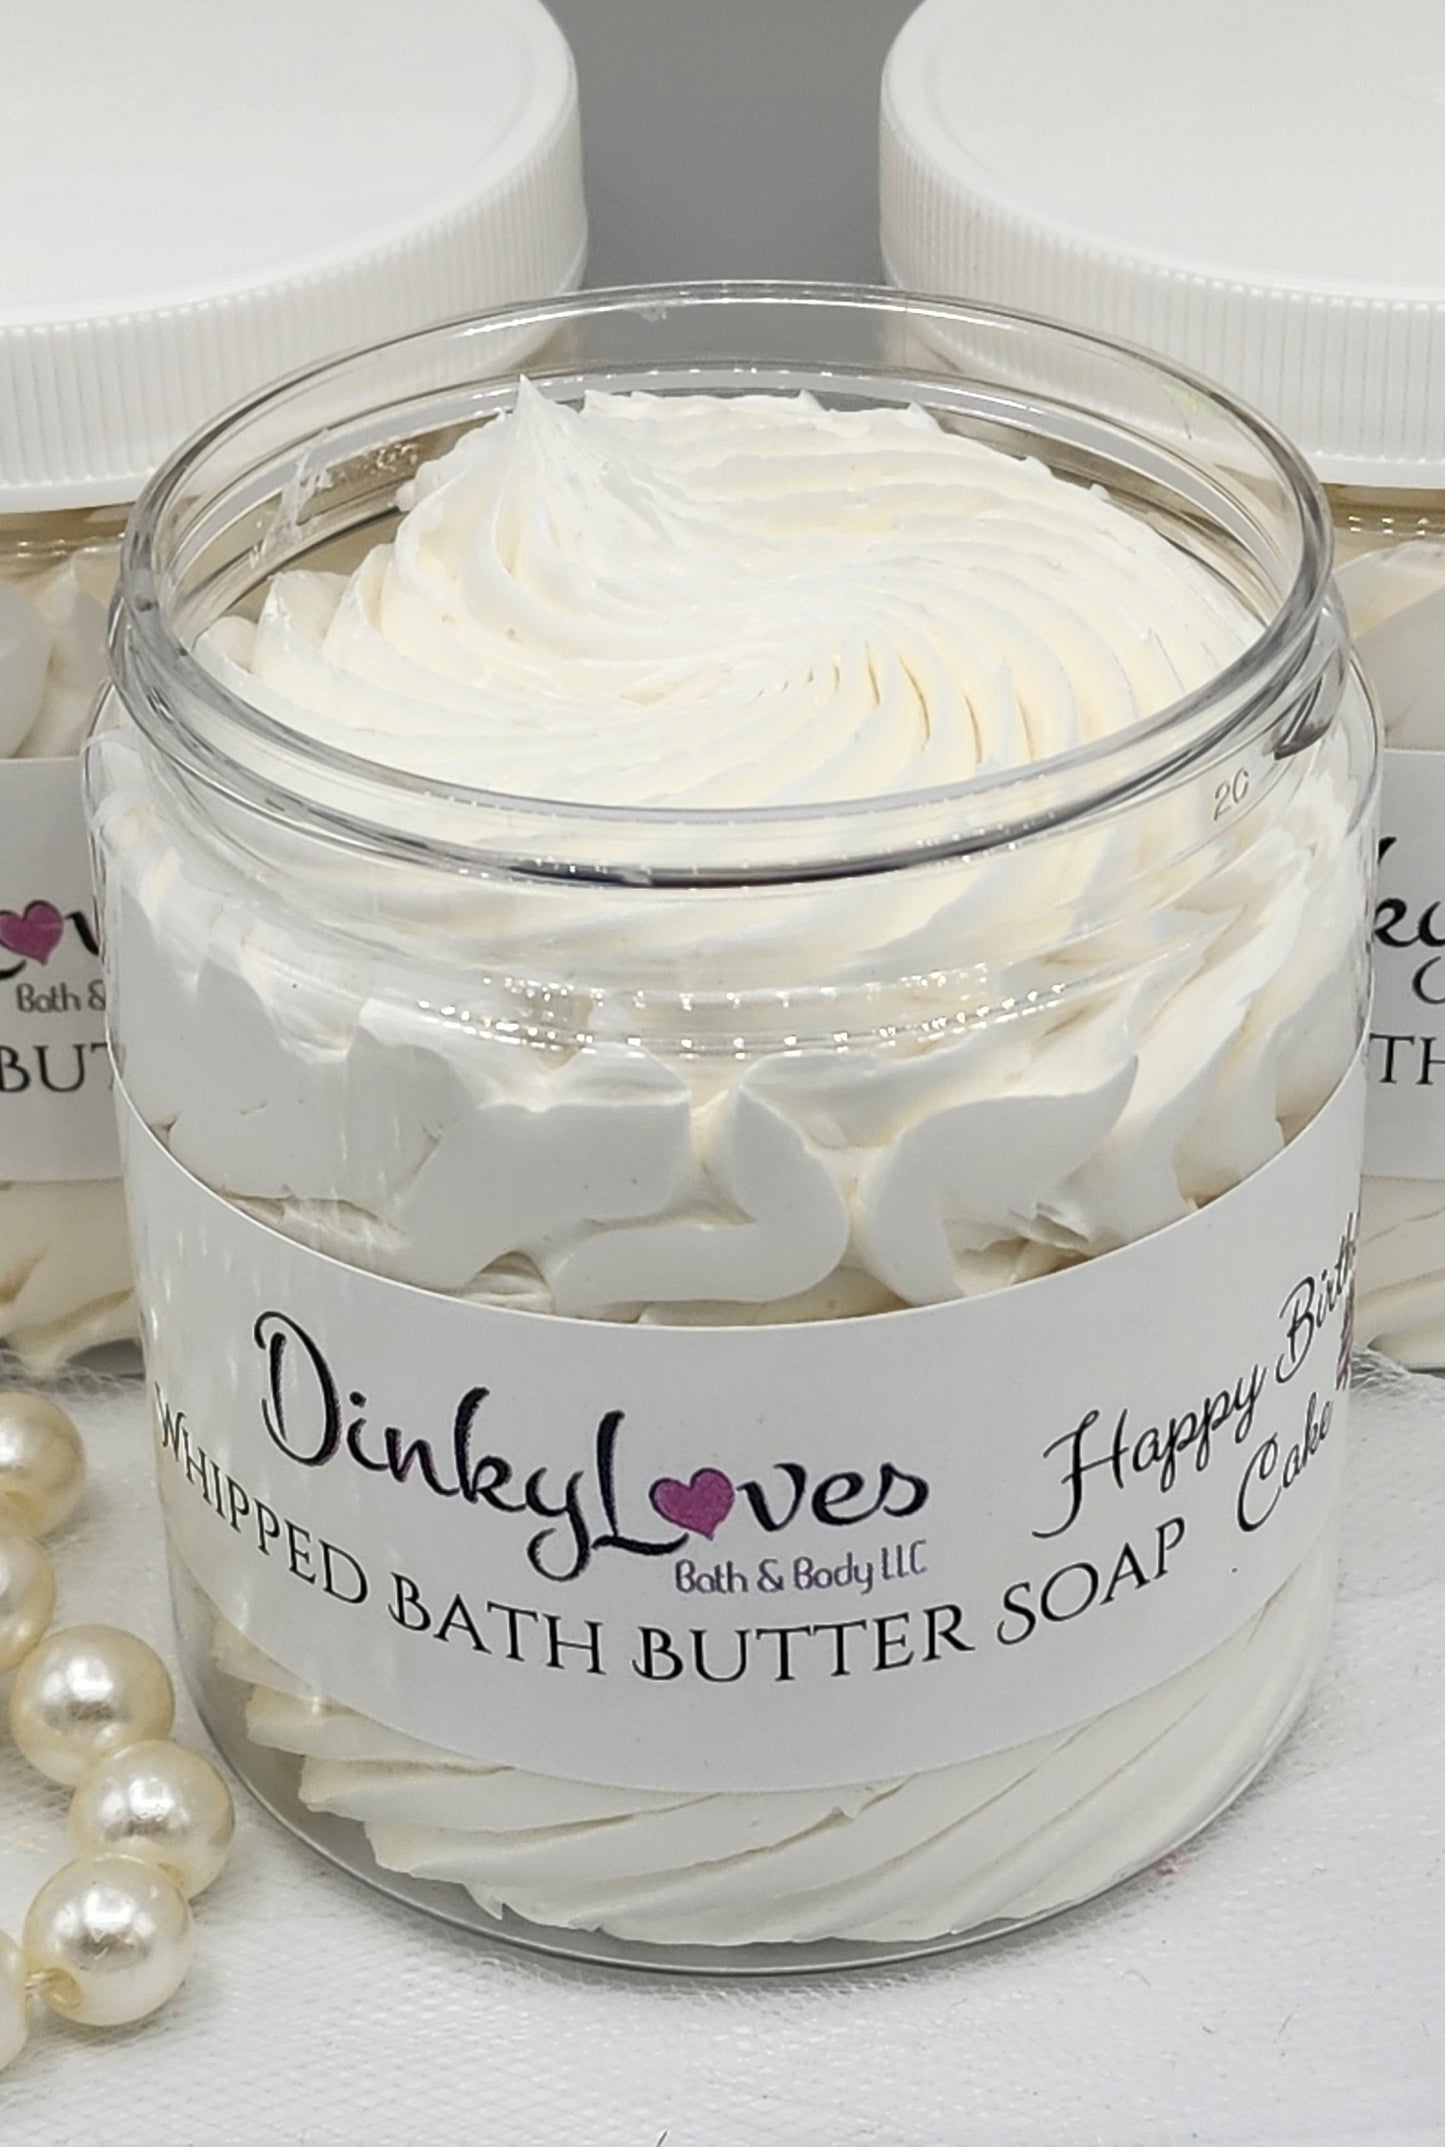 HAPPY BIRTHDAY Whipped Bath Butter Soap / Gift Idea / Luxury Product / Cocoa Butter